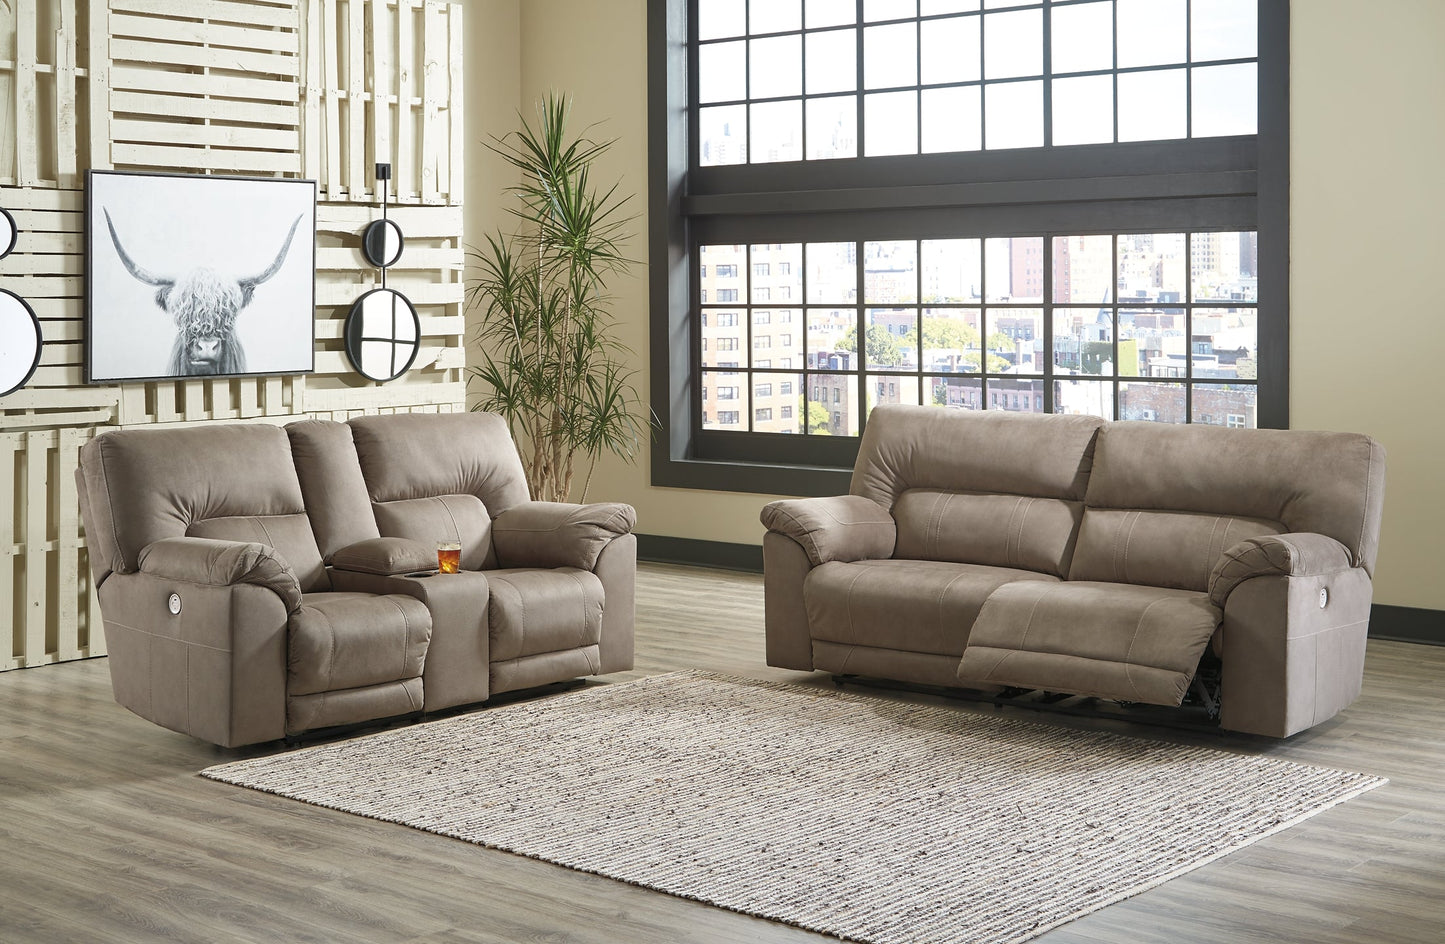 Cavalcade Sofa and Loveseat at Walker Mattress and Furniture Locations in Cedar Park and Belton TX.